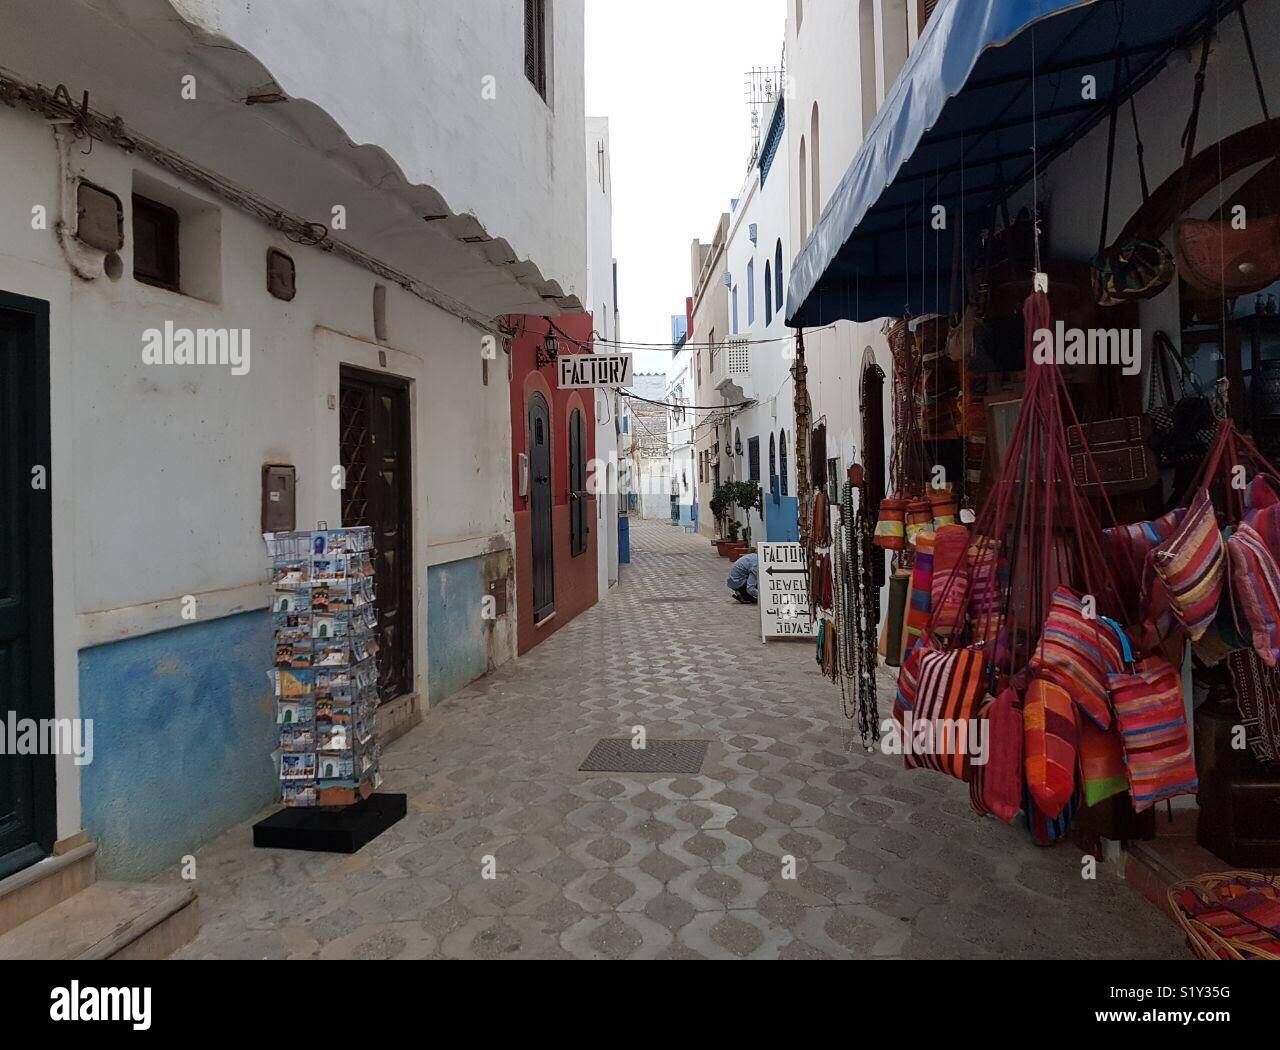 Souvenir shops in the Old City of Assilah, Morocco Stock Photo